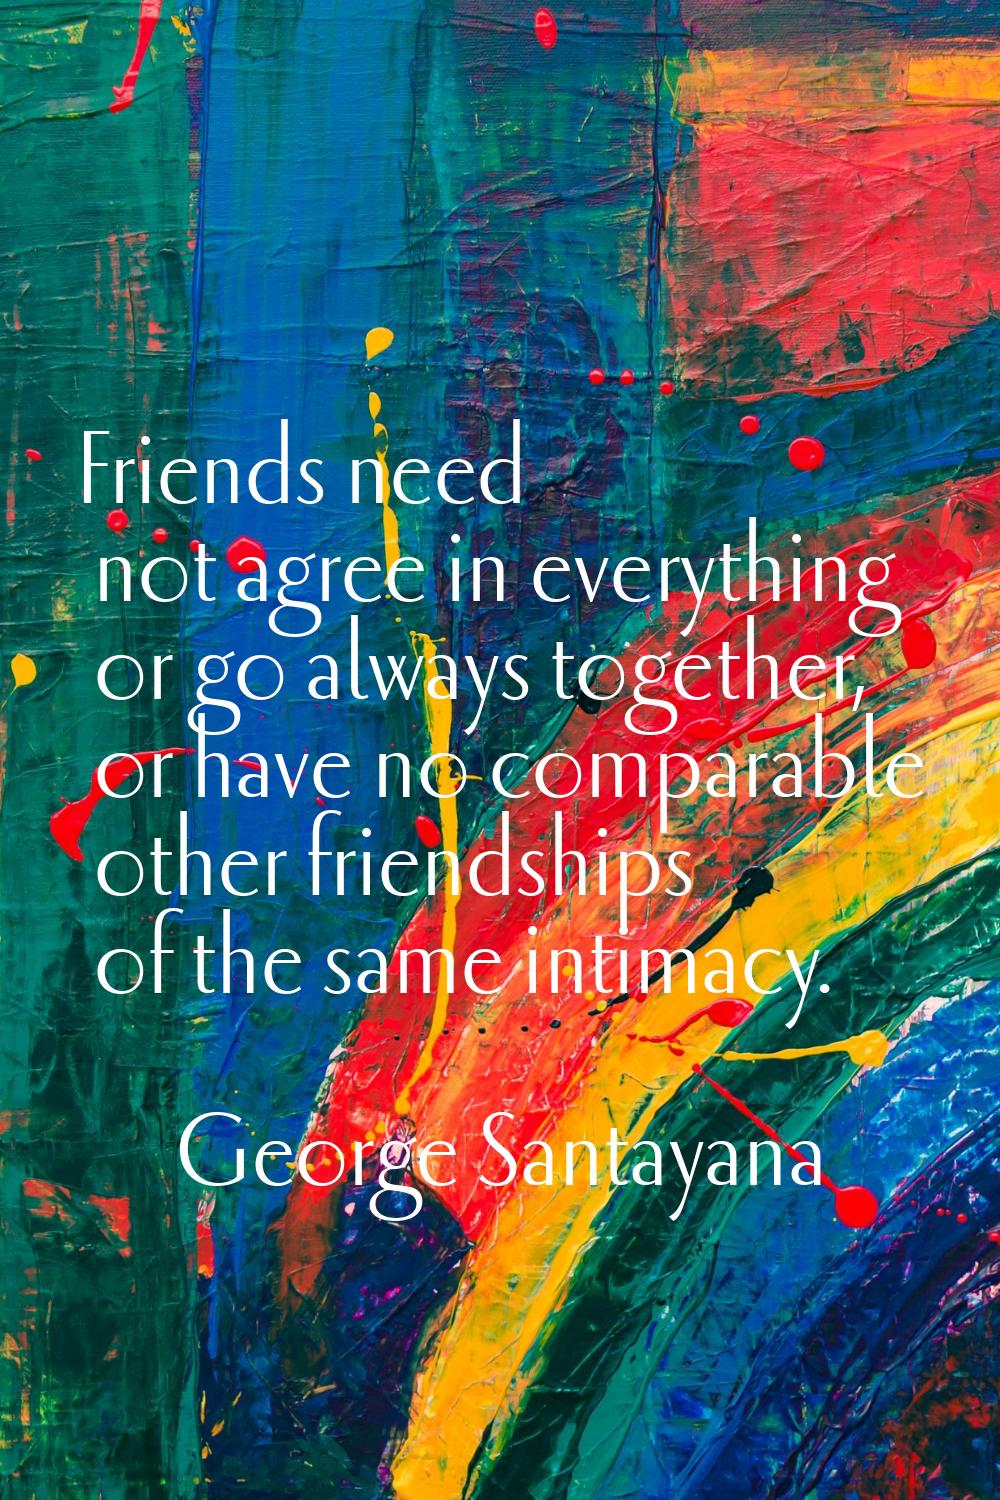 Friends need not agree in everything or go always together, or have no comparable other friendships